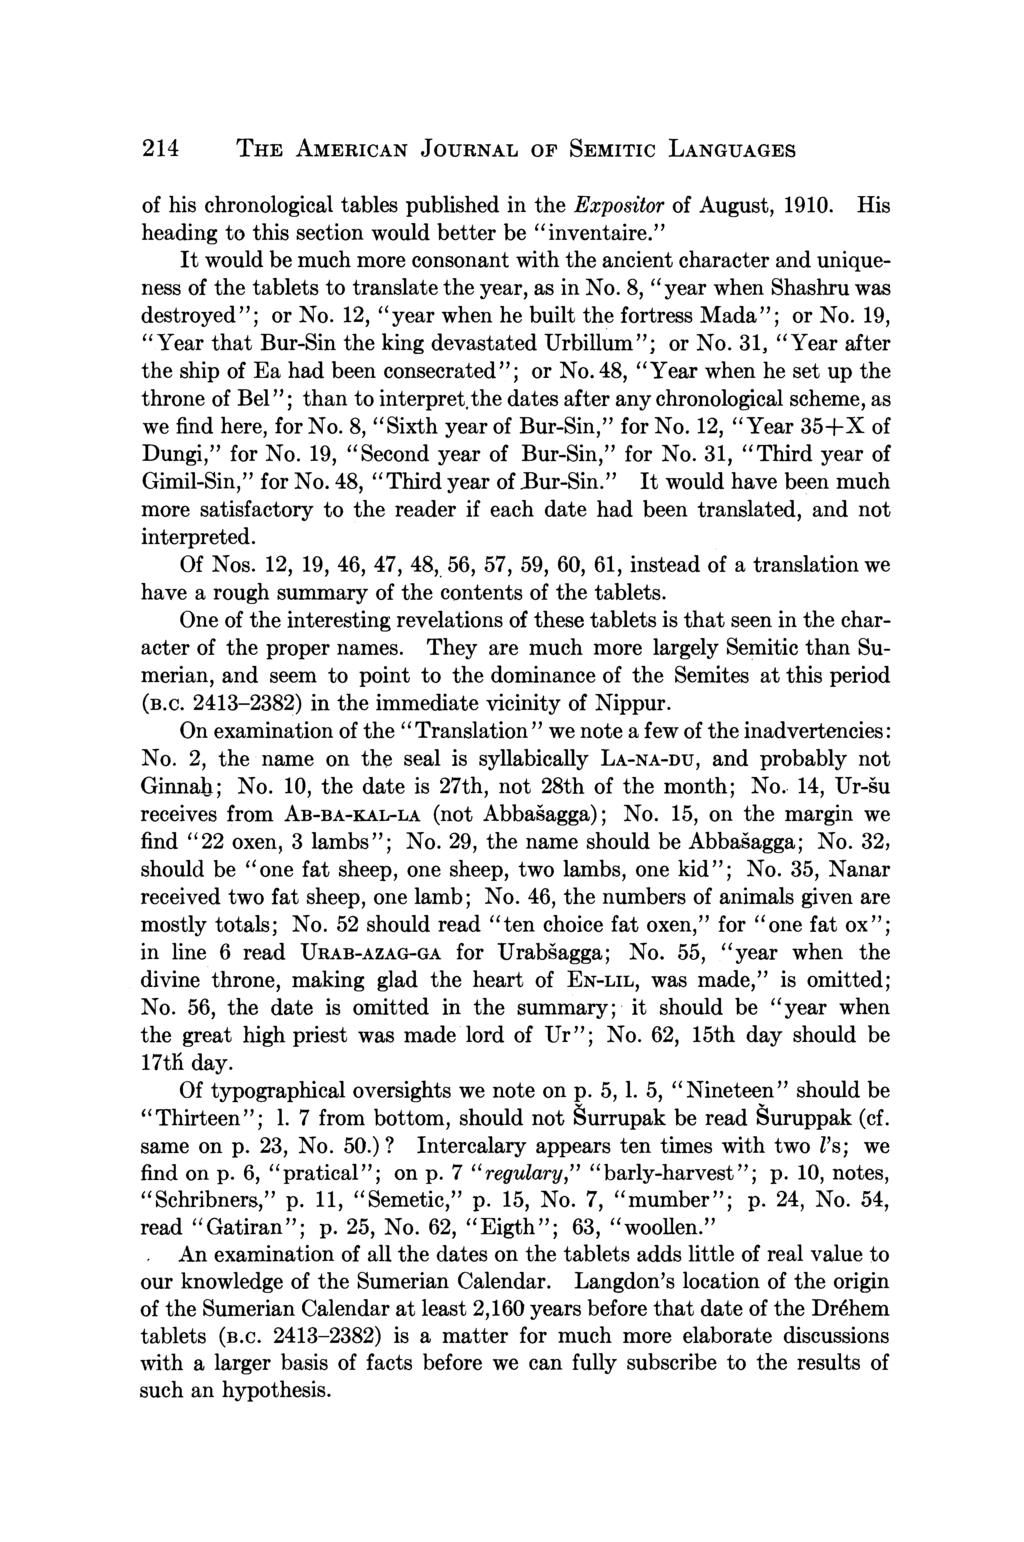 214 THE AMERICAN JOURNAL OF SEMITIC LANGUAGES of his chronological tables published in the Expositor of August, 1910. His heading to this section would better be "inventaire.